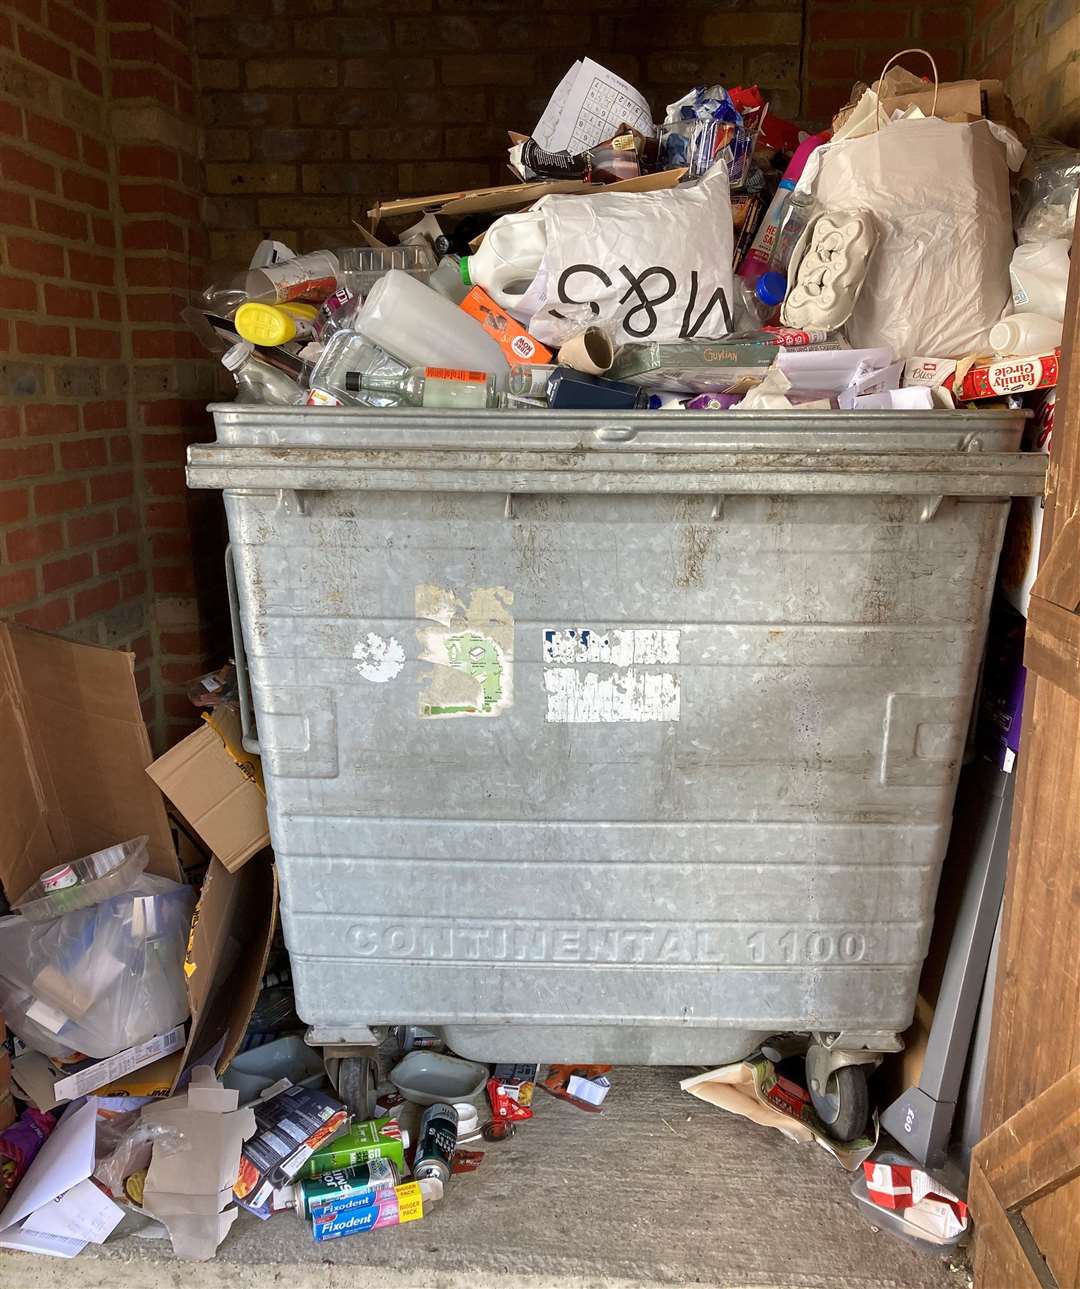 Sue Taylor says uncollected bins were posing a health risk for her mum and other retirees at The Turrets in Sittingbourne. Picture: Sue Taylor